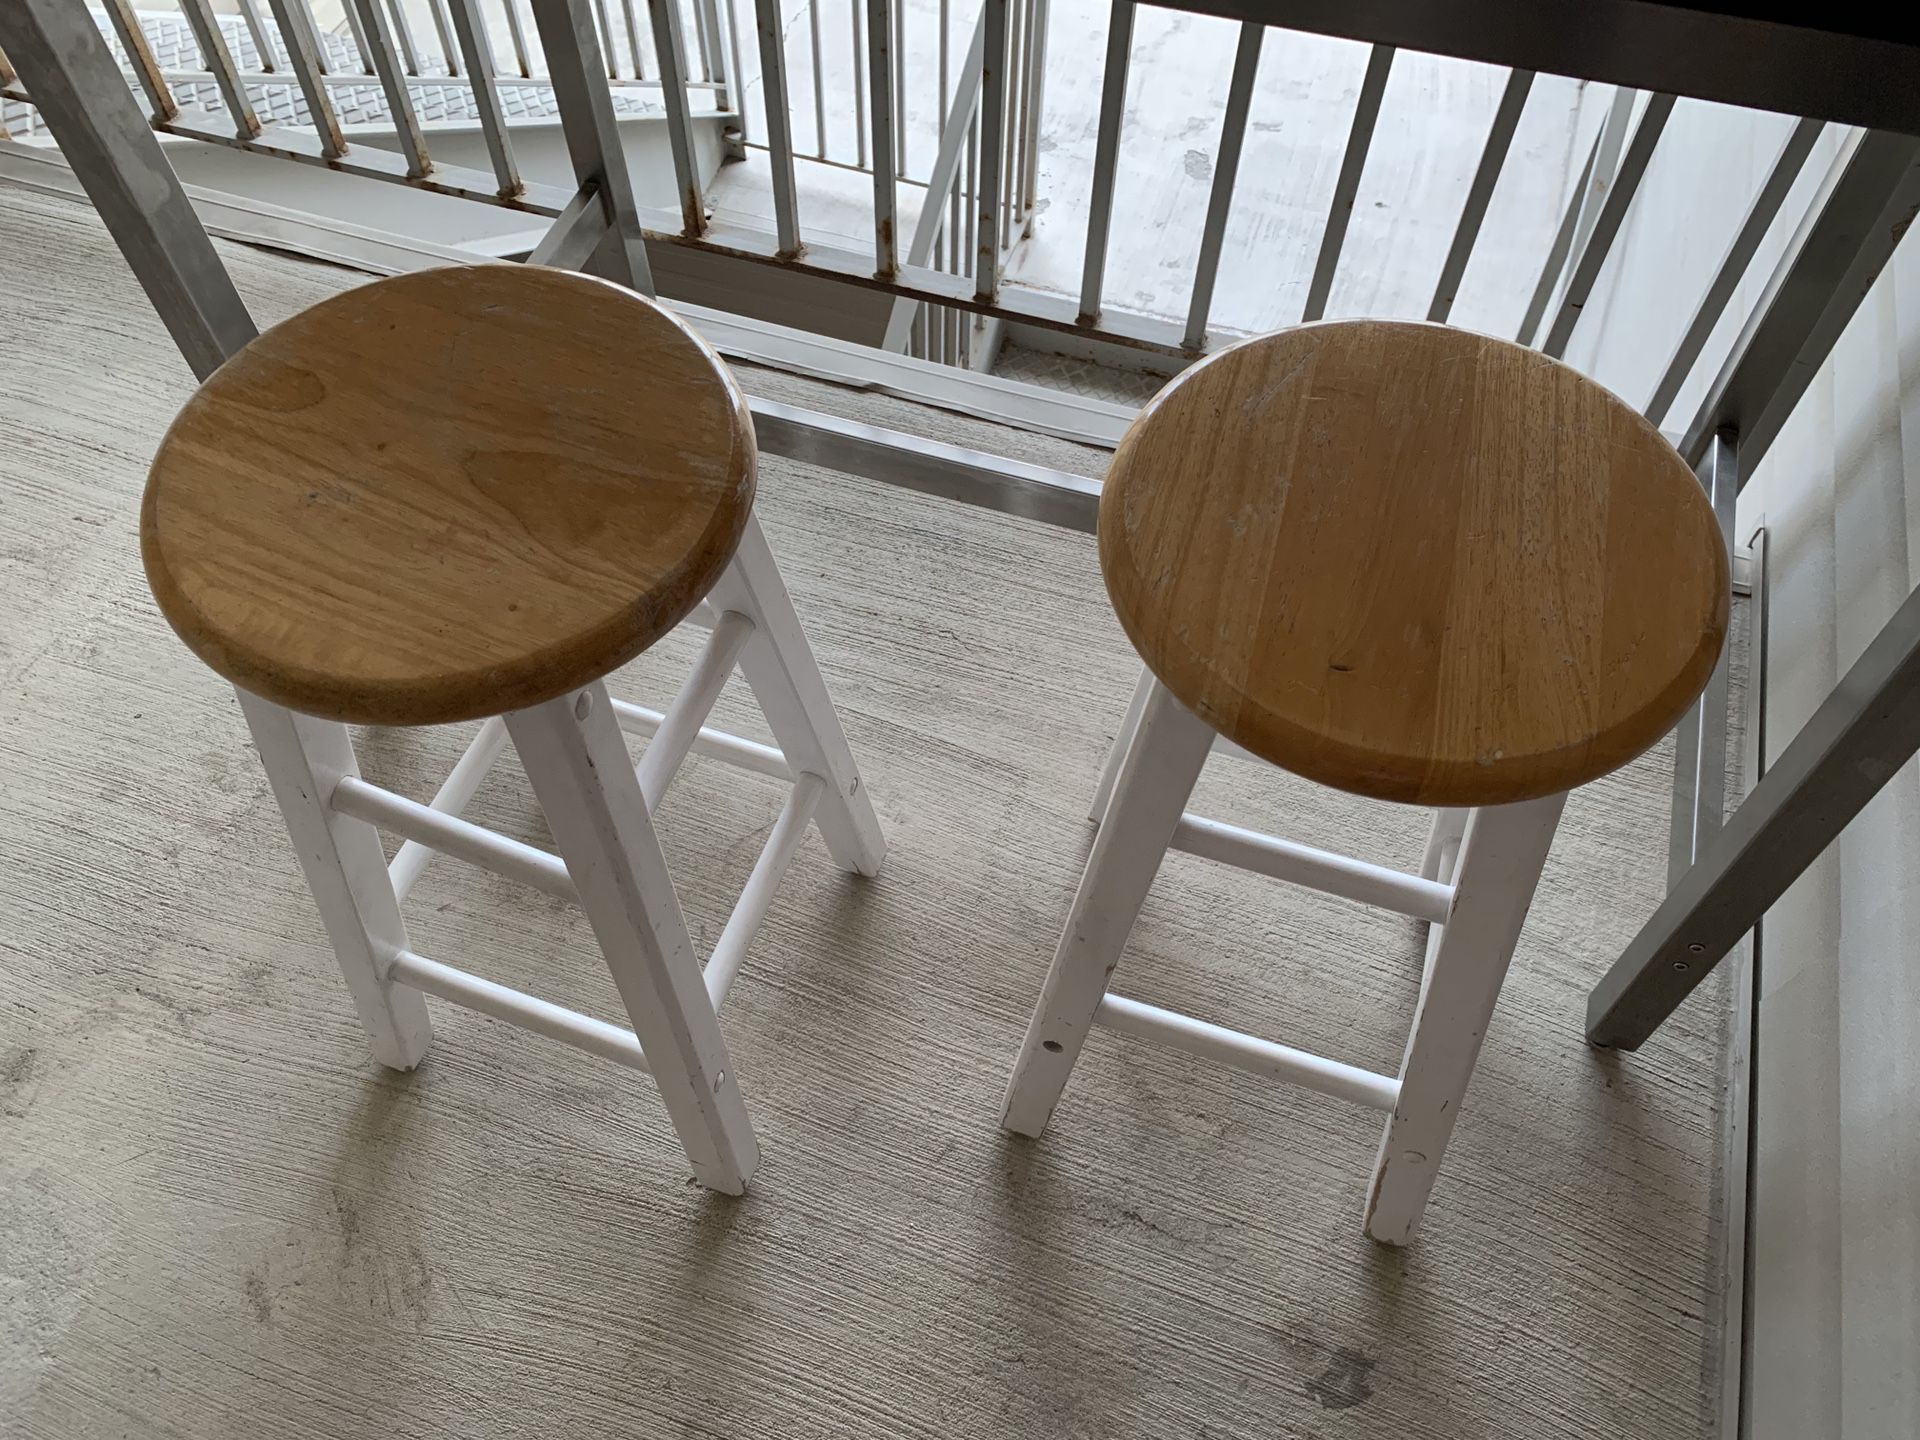 Winsome beveled seat stools, table not included